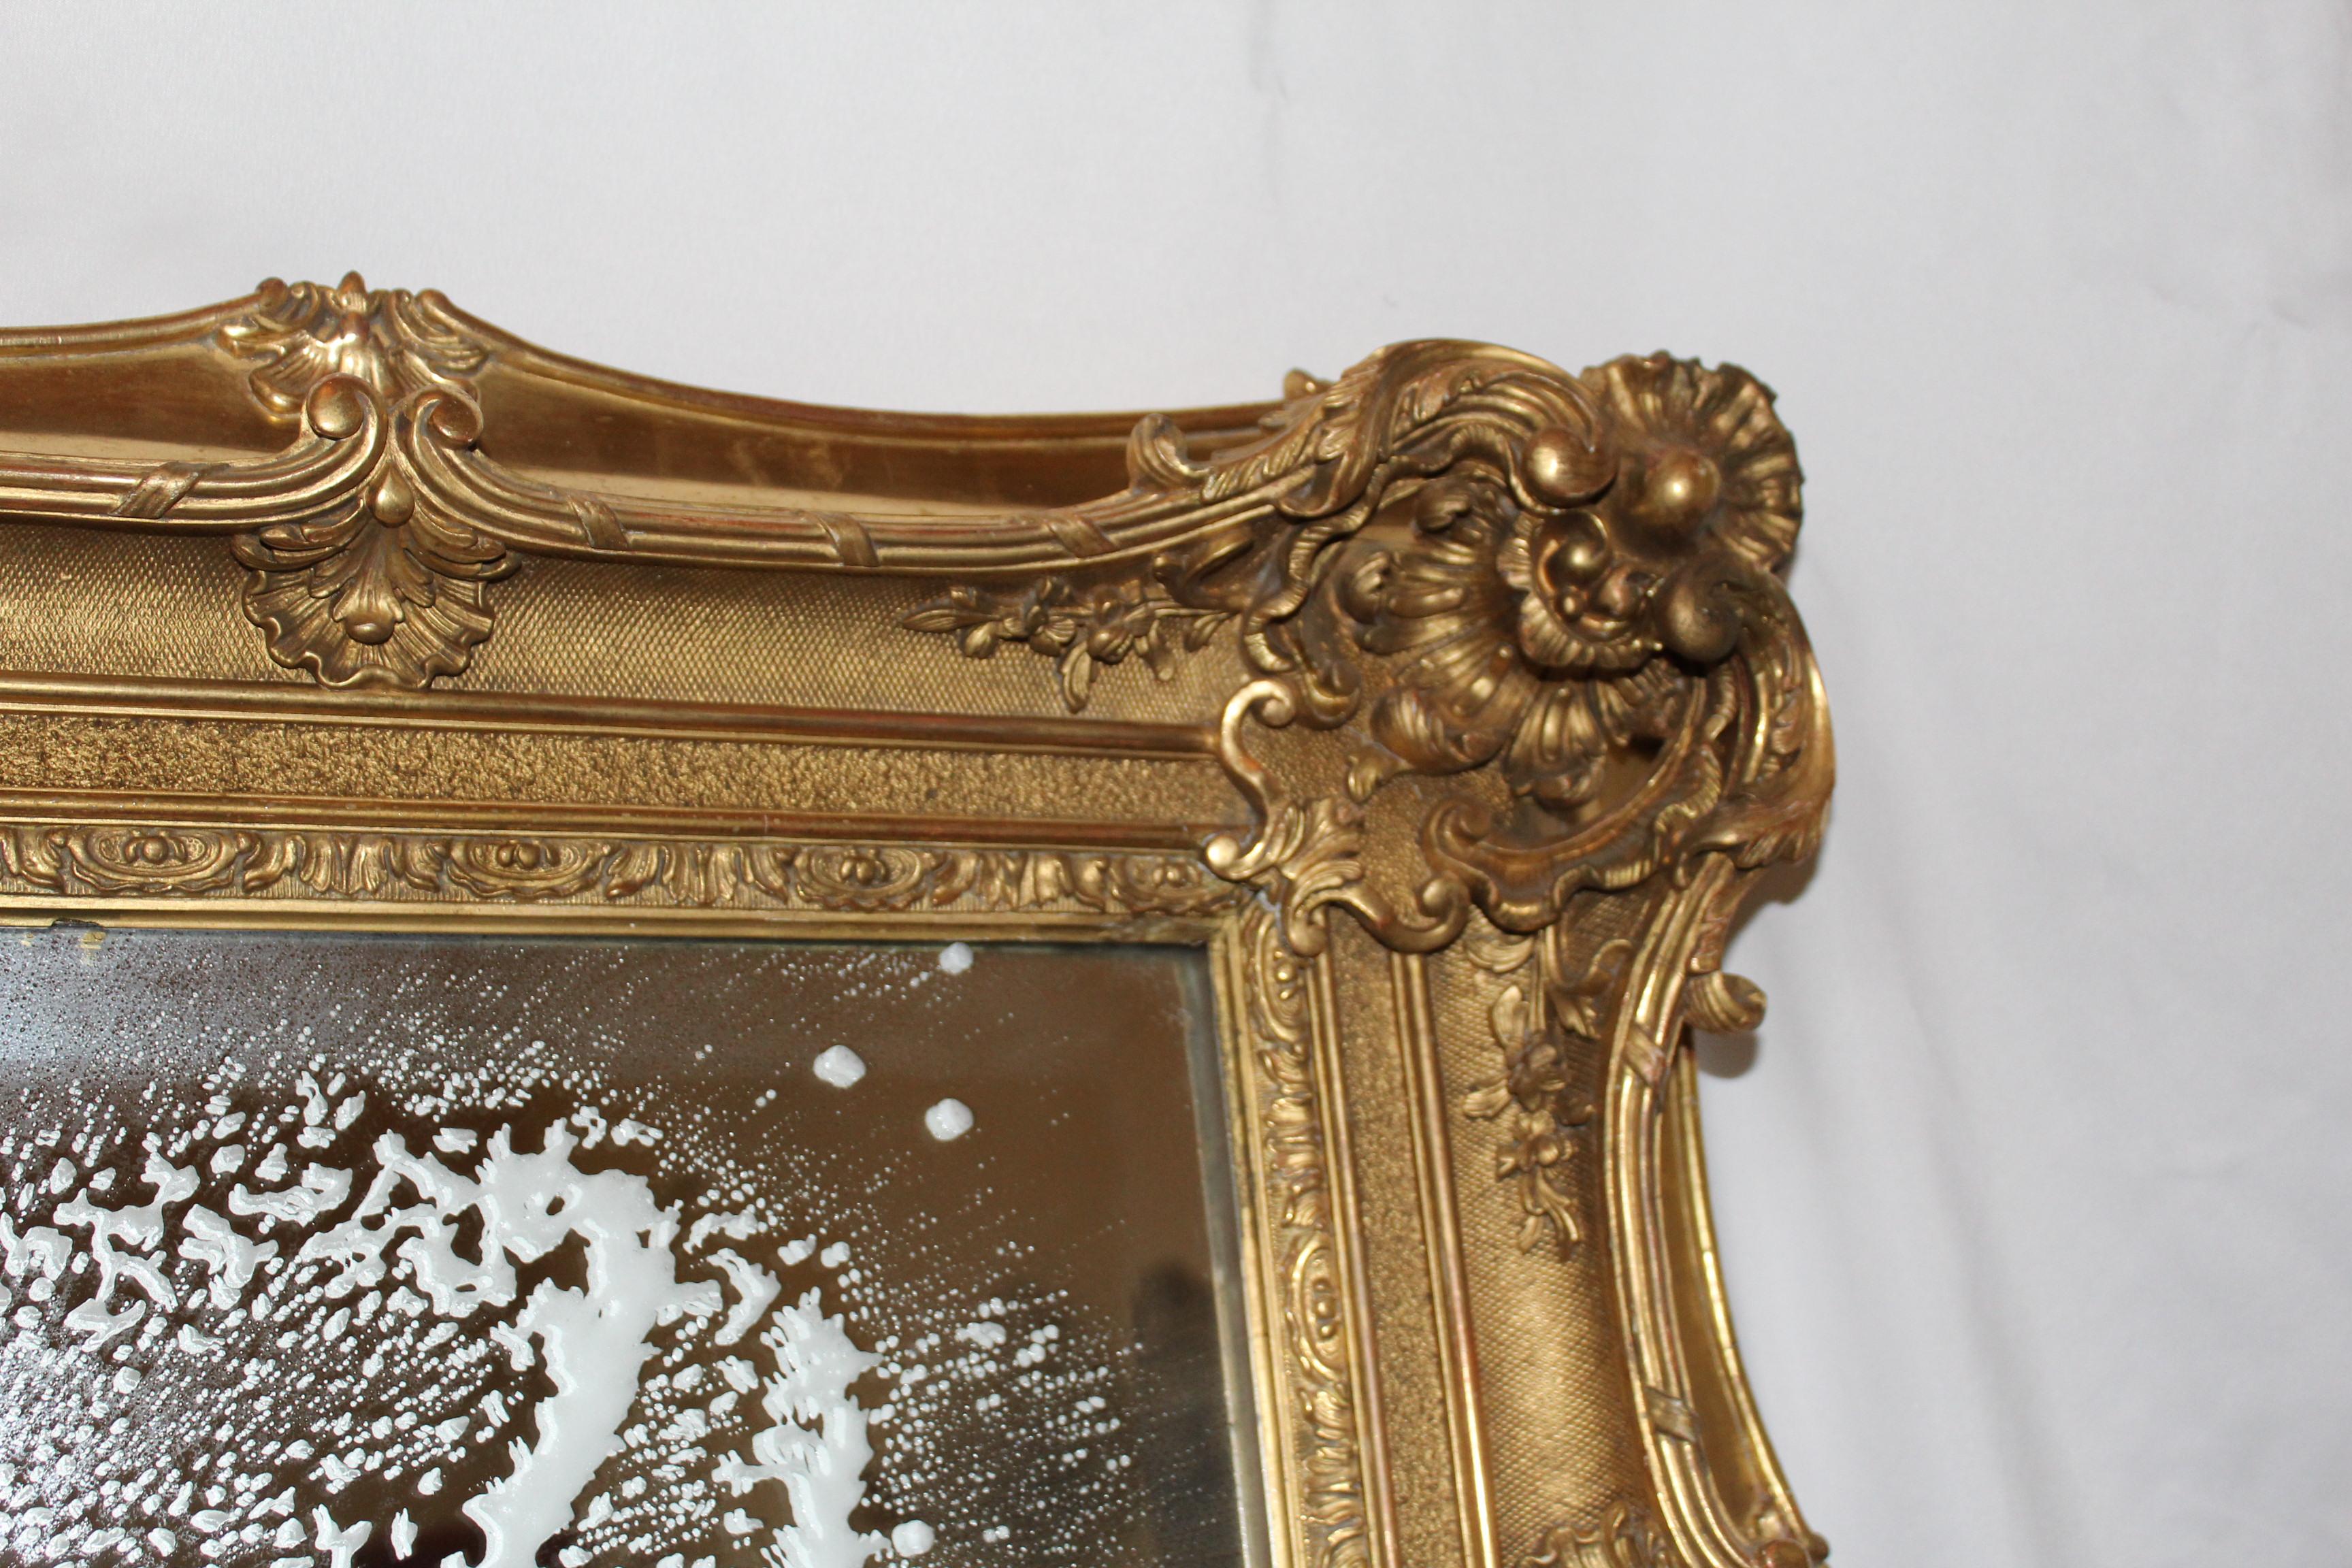 A Hi-Quality Large gold leaf French picture frame bought in Paris 30 years ago by me and kept in a Private home. Might be made around 1900,not sure .Installed with a beveled mirror 36 x 31. Old repairs to the gold leaf, not a lot. Very heavy as it